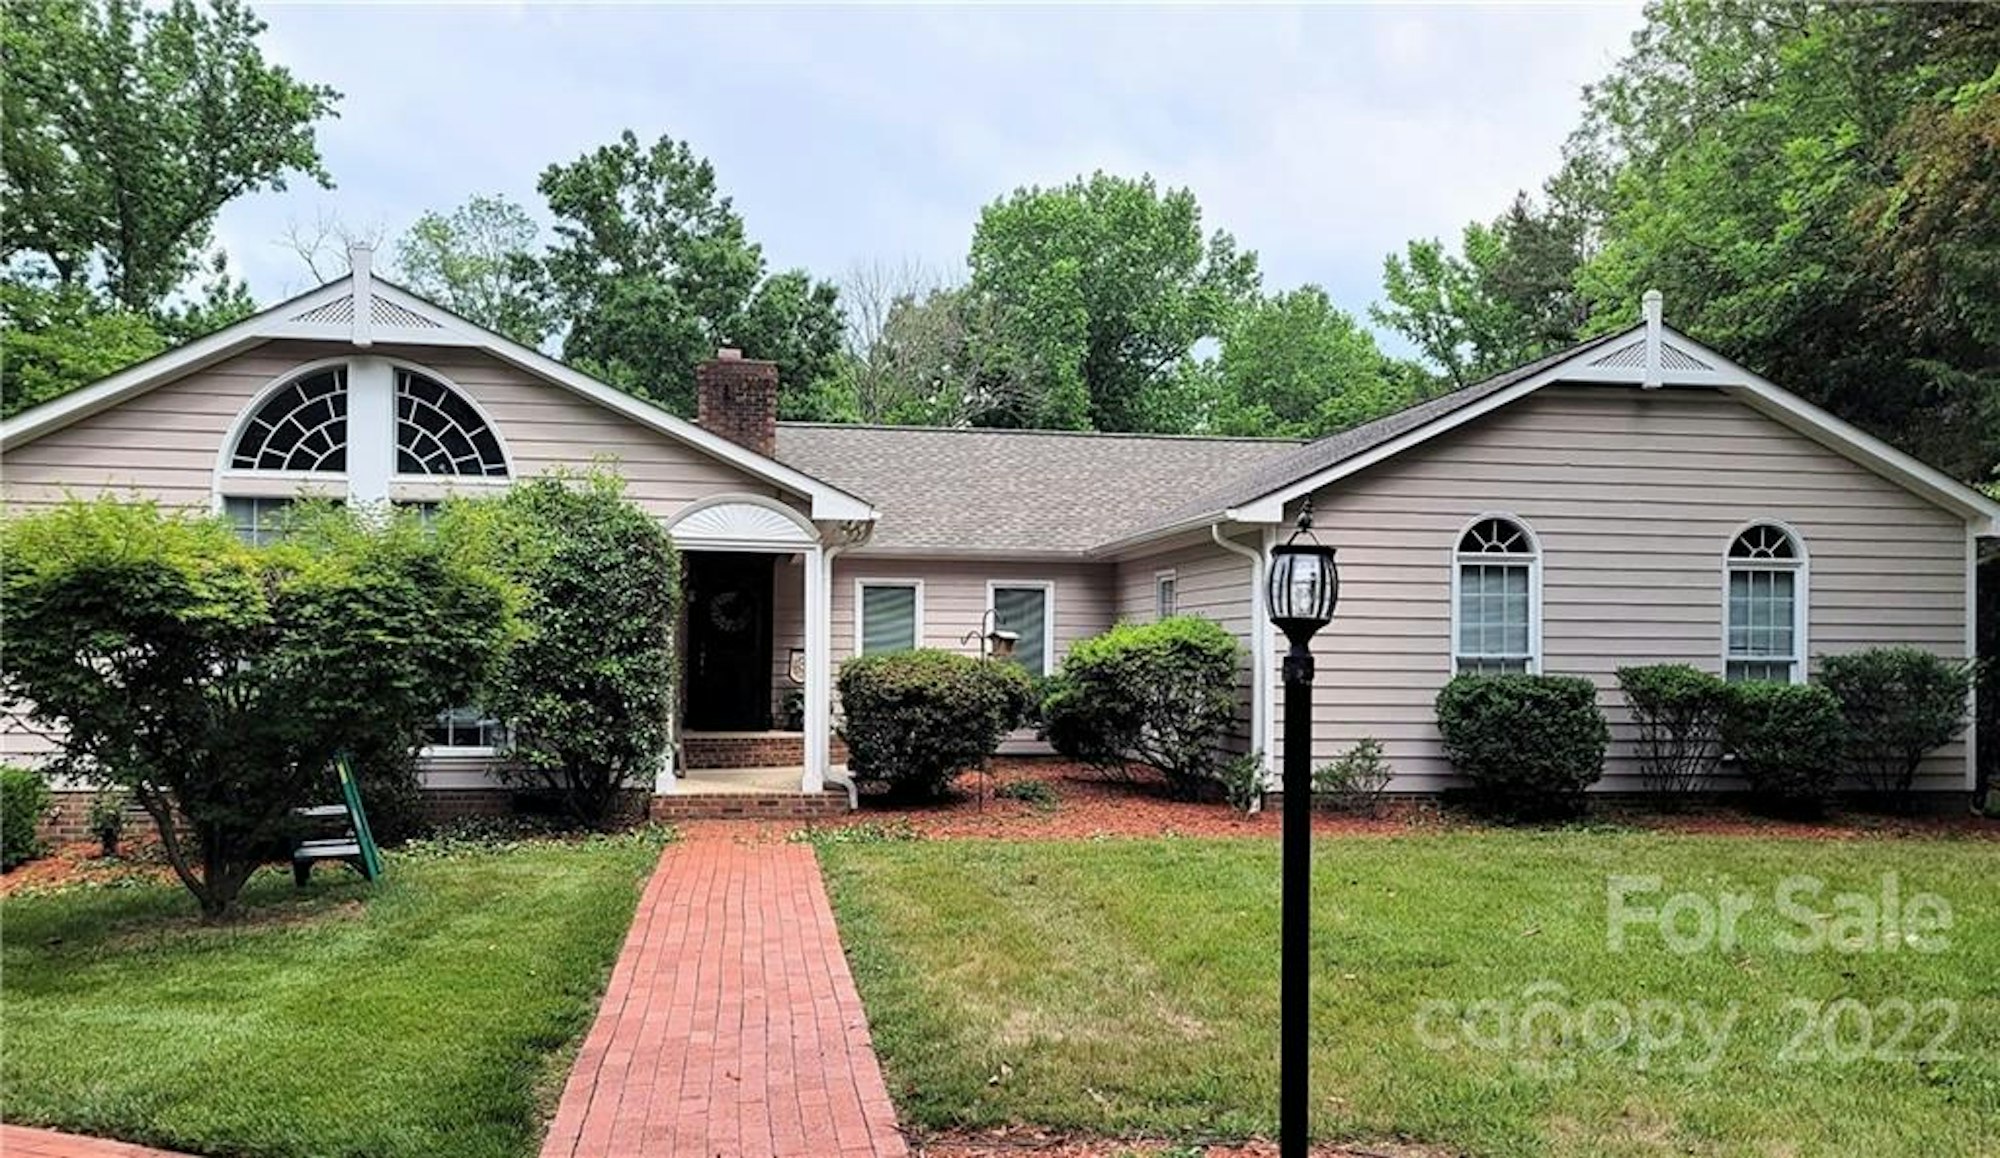 Photo 1 of 43 - 3206 Kendale Ave NW, Concord, NC 28027